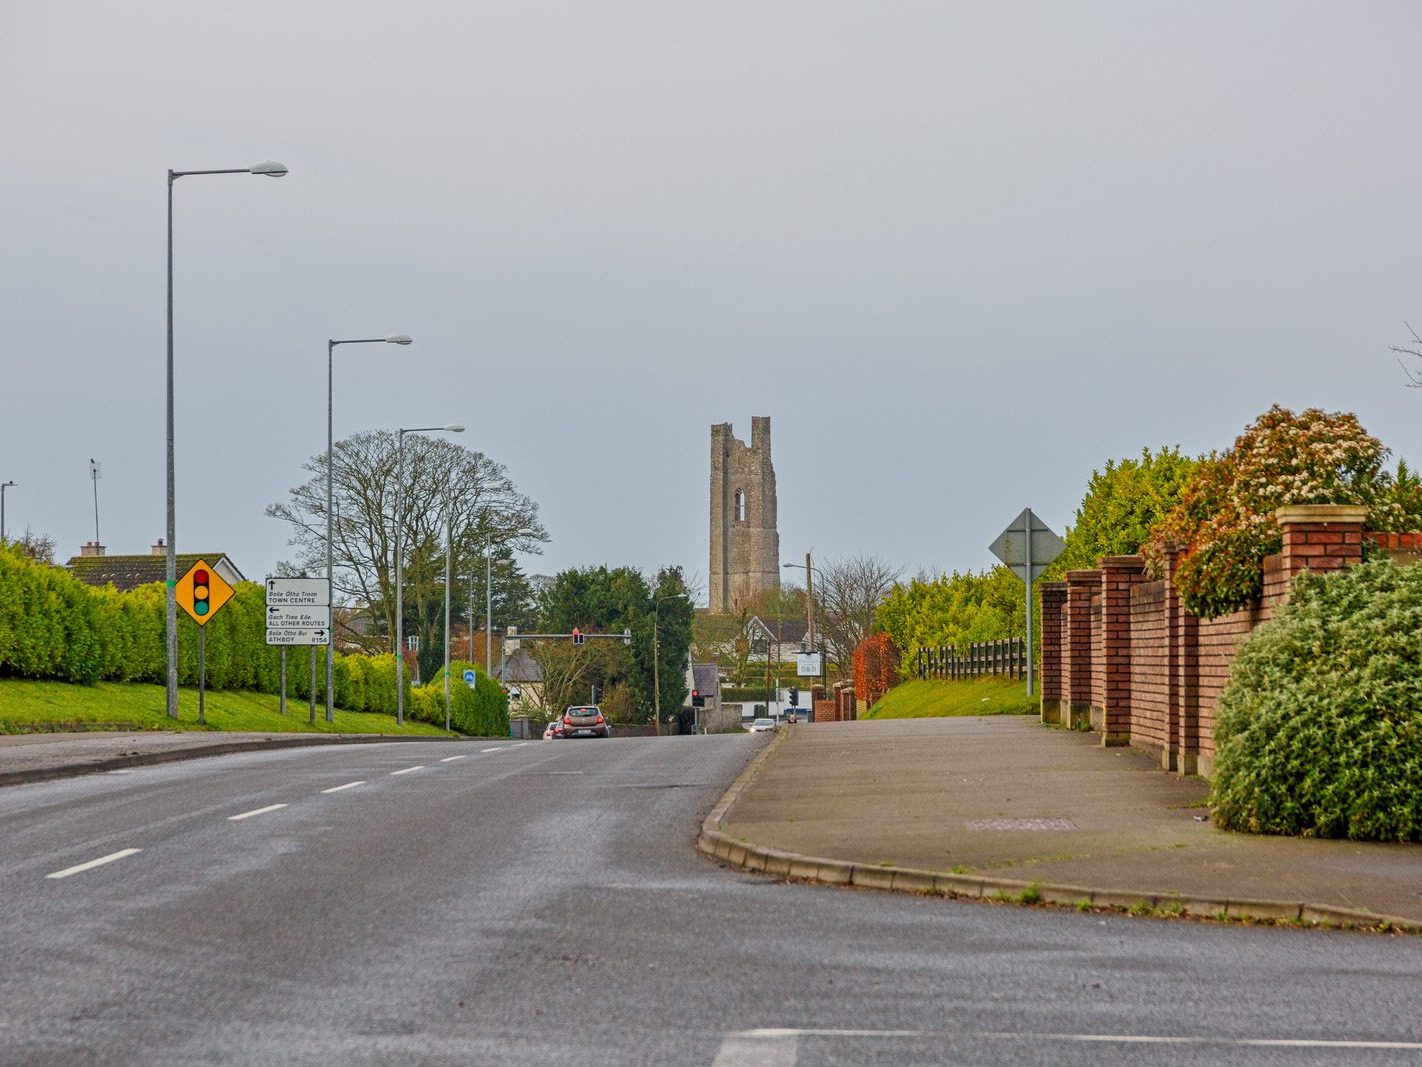 THE YELLOW STEEPLE DOMINATES THE TOWN OF TRIM [ALSO KNOWN AS ST MARYS ABBEY]-226754-1